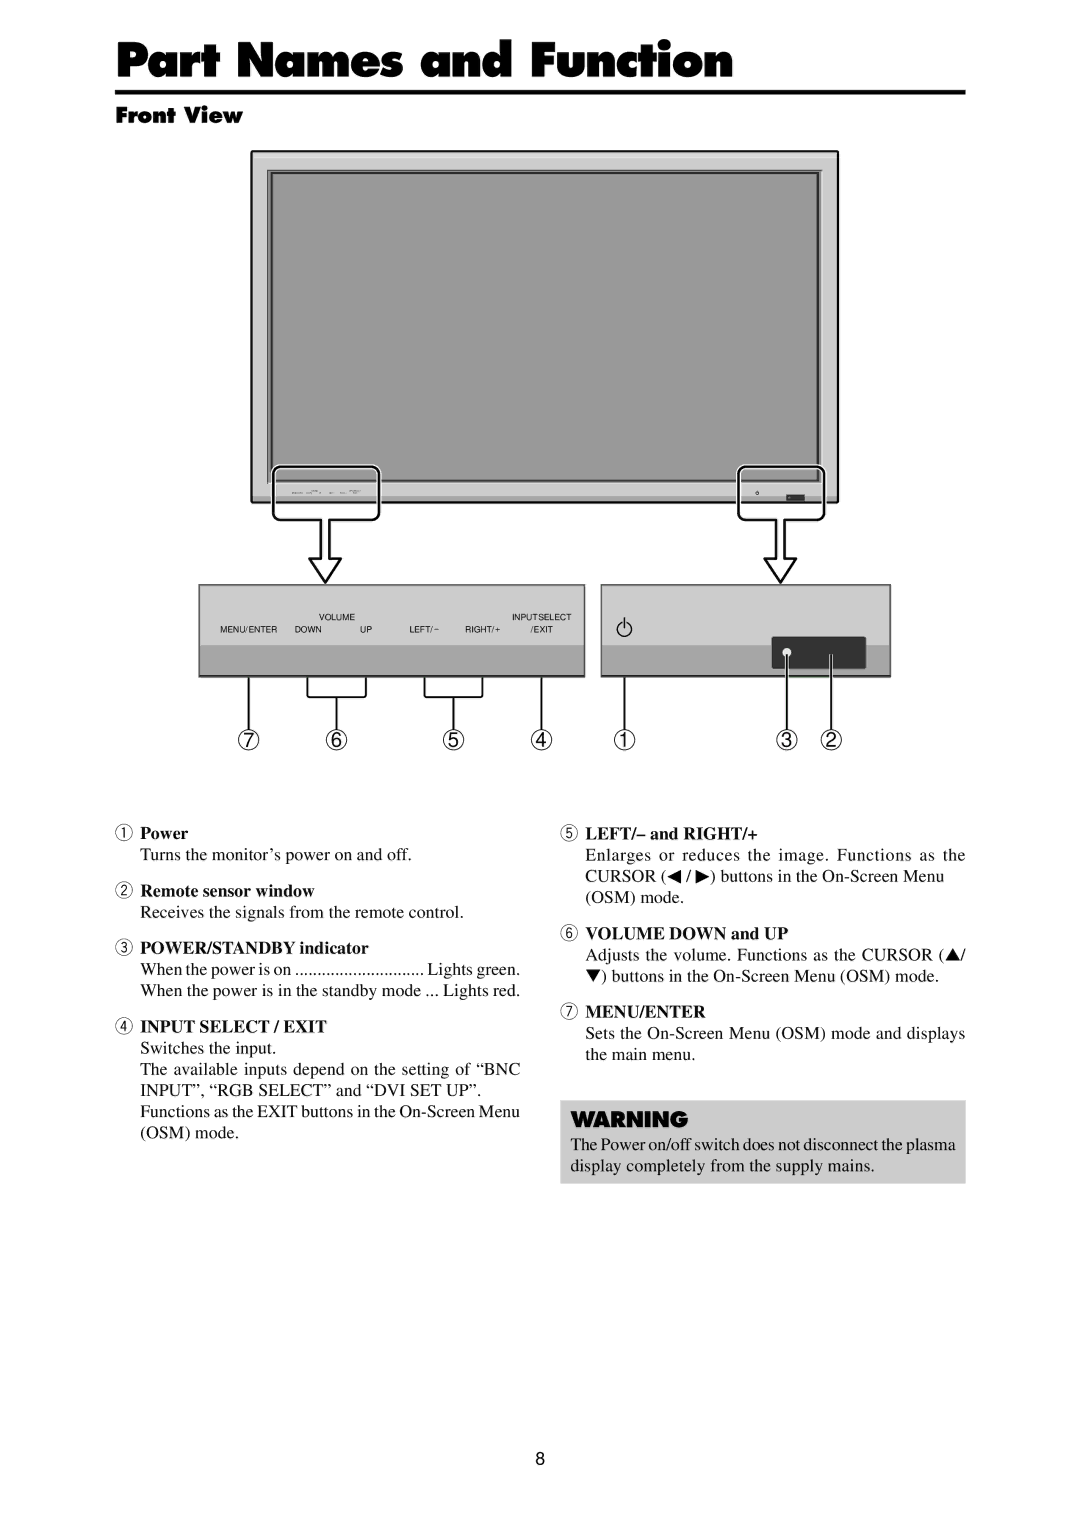 Dukane P42A specifications Part Names and Function, Front View, Turns the monitor’s power on and off 